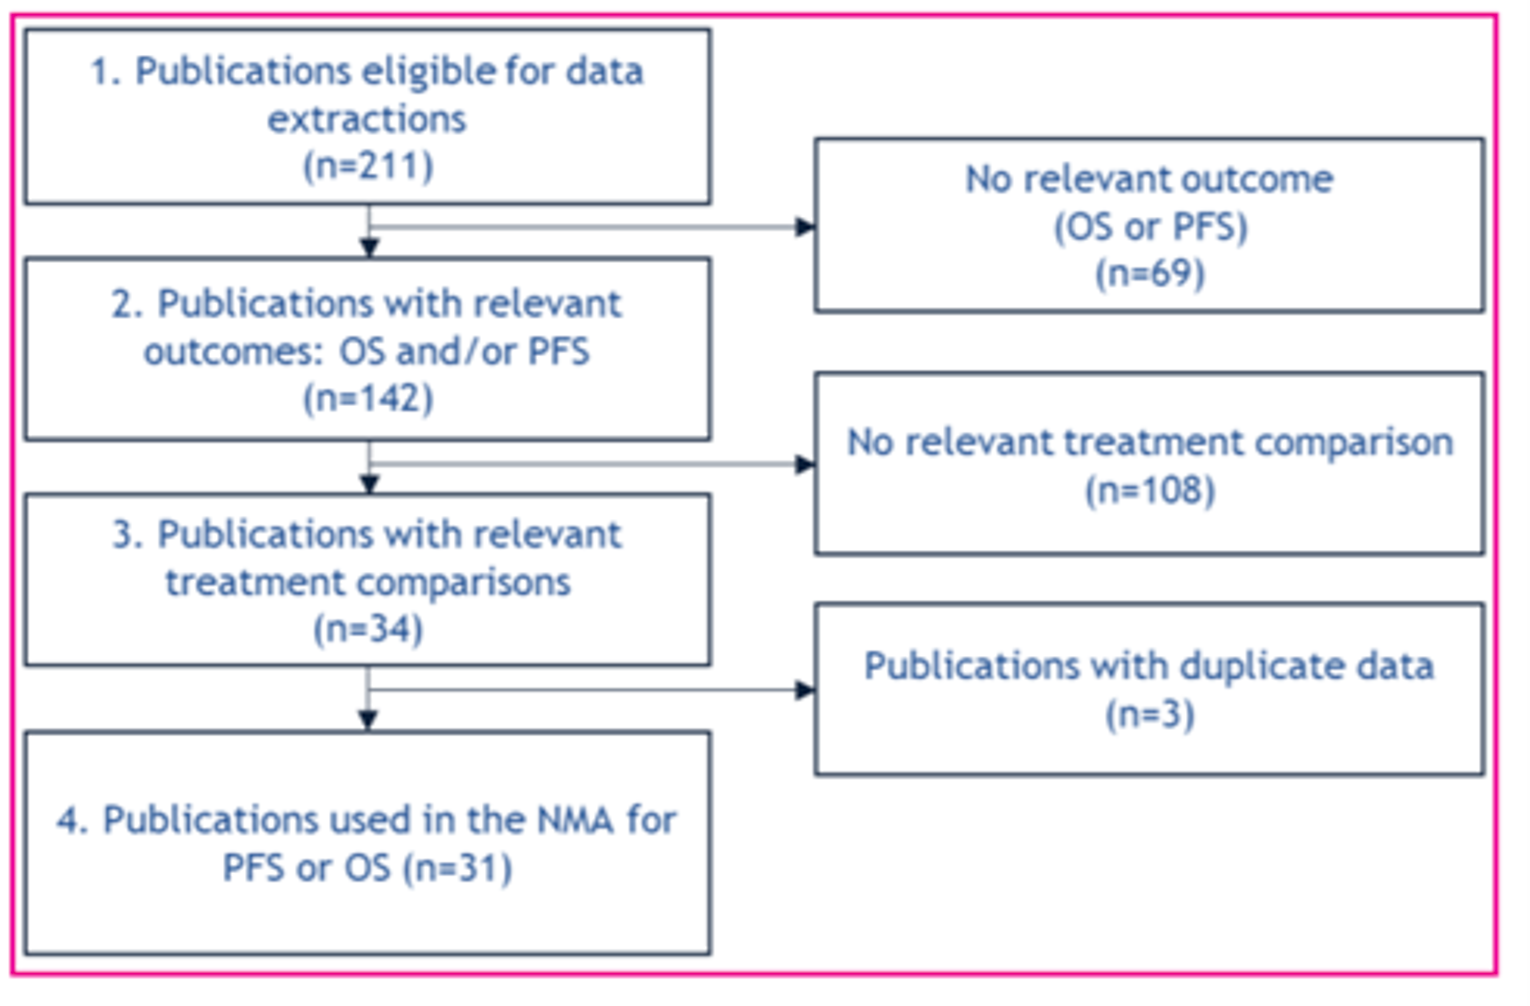 A total of 211 eligible publications were found, of which 142 had relevant OS and/or PFS outcomes. Of these, 34 had relevant treatment comparisons. After removing publications with duplicate data, there were a total of 31 used in the NMA.